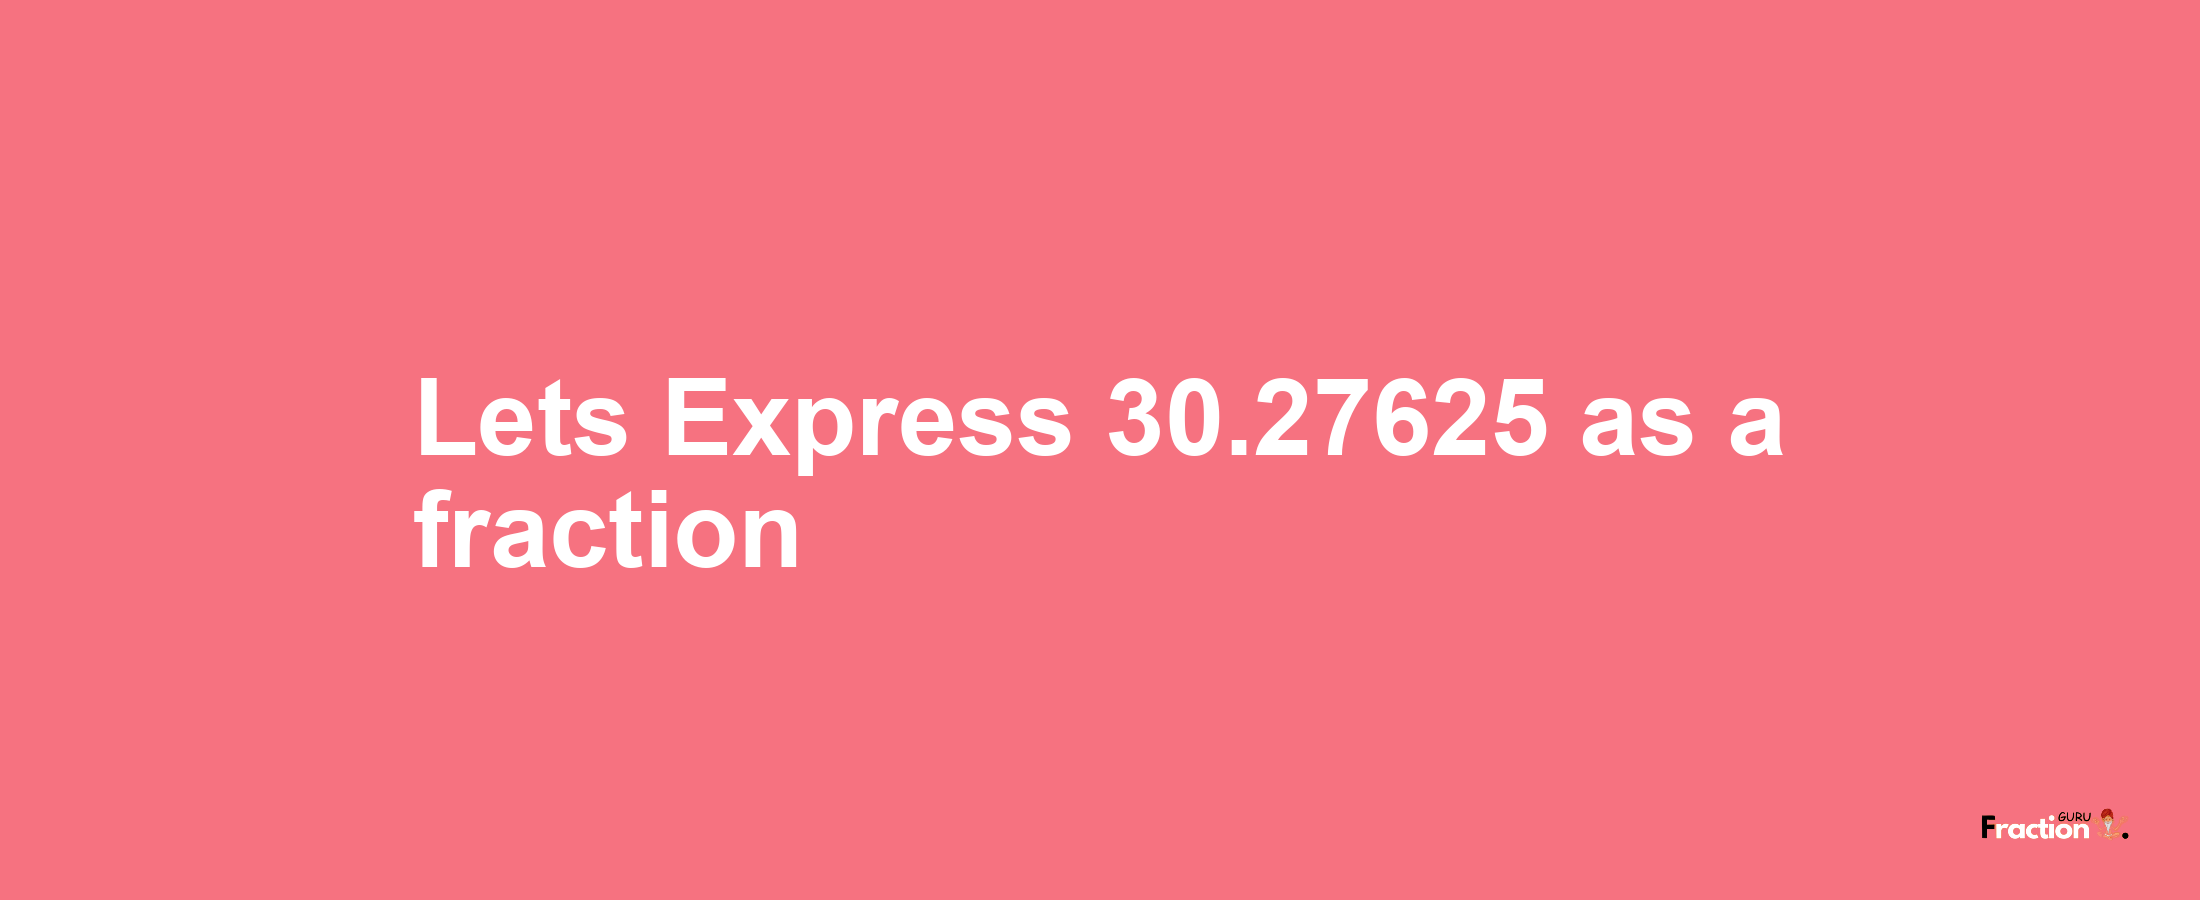 Lets Express 30.27625 as afraction